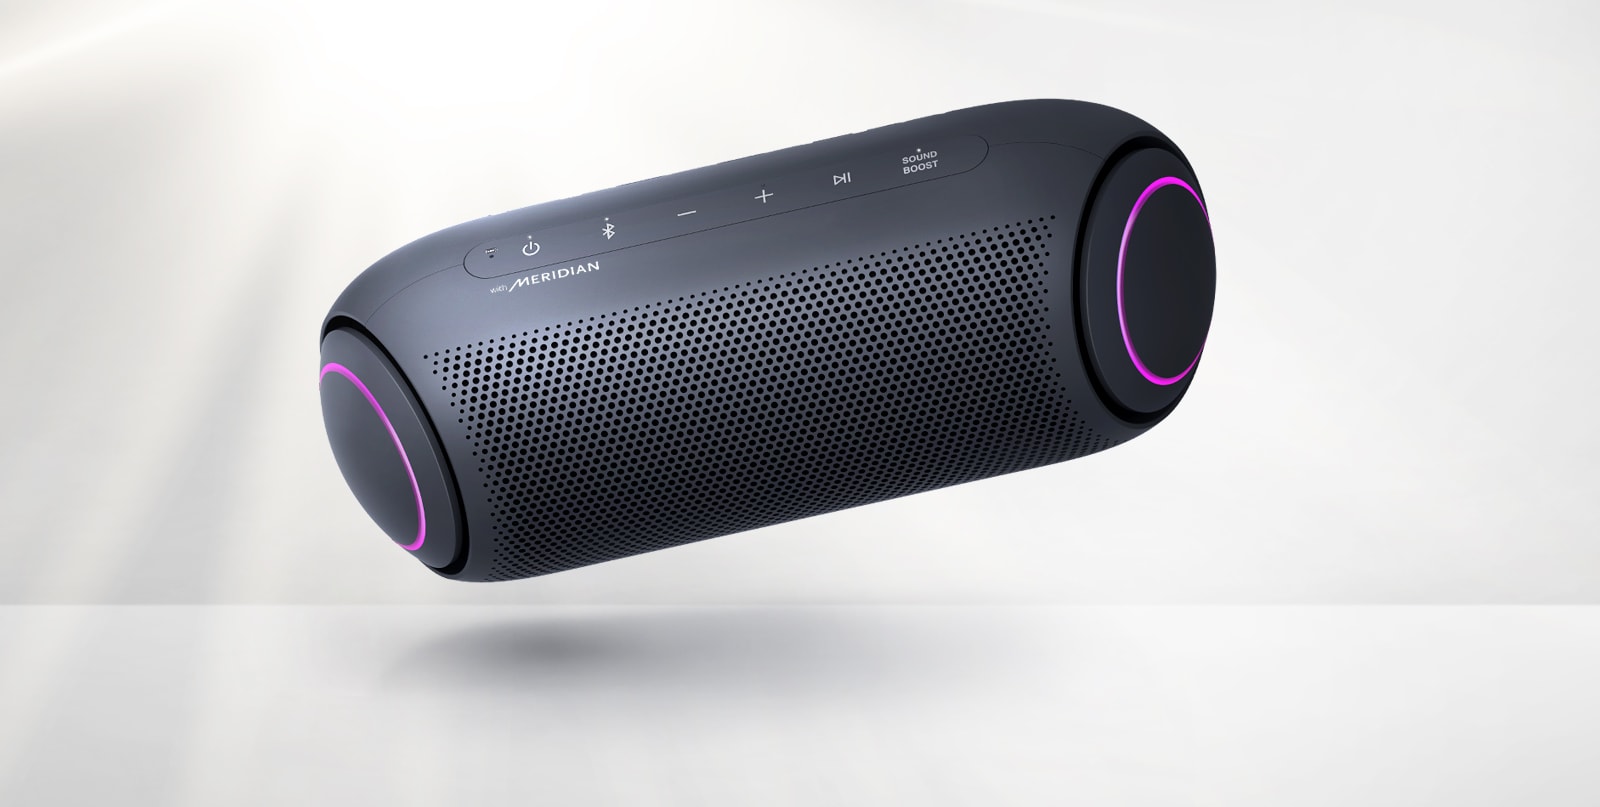 LG XBOOM Go tilts to the left and floats in the air. The woofer lighting is magenta.